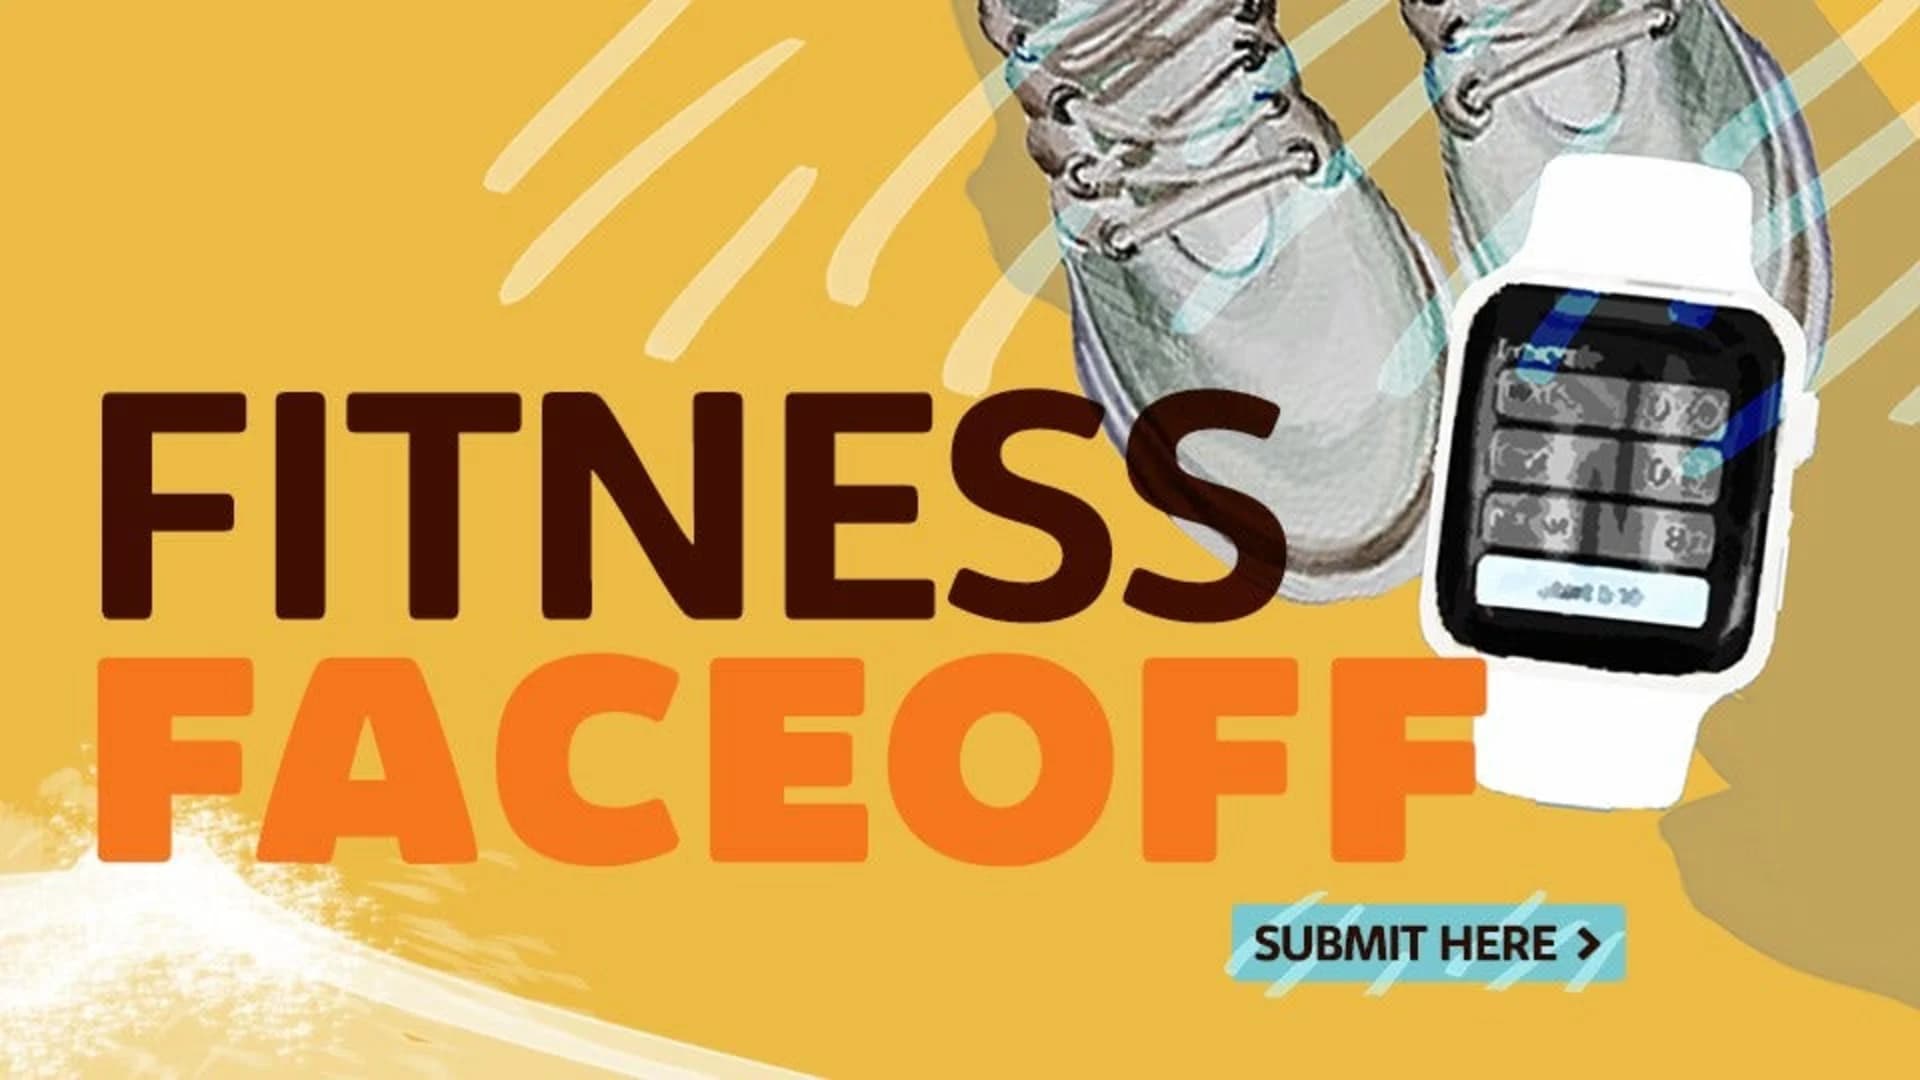 Fitness Face-off crosses the finish line in Brooklyn